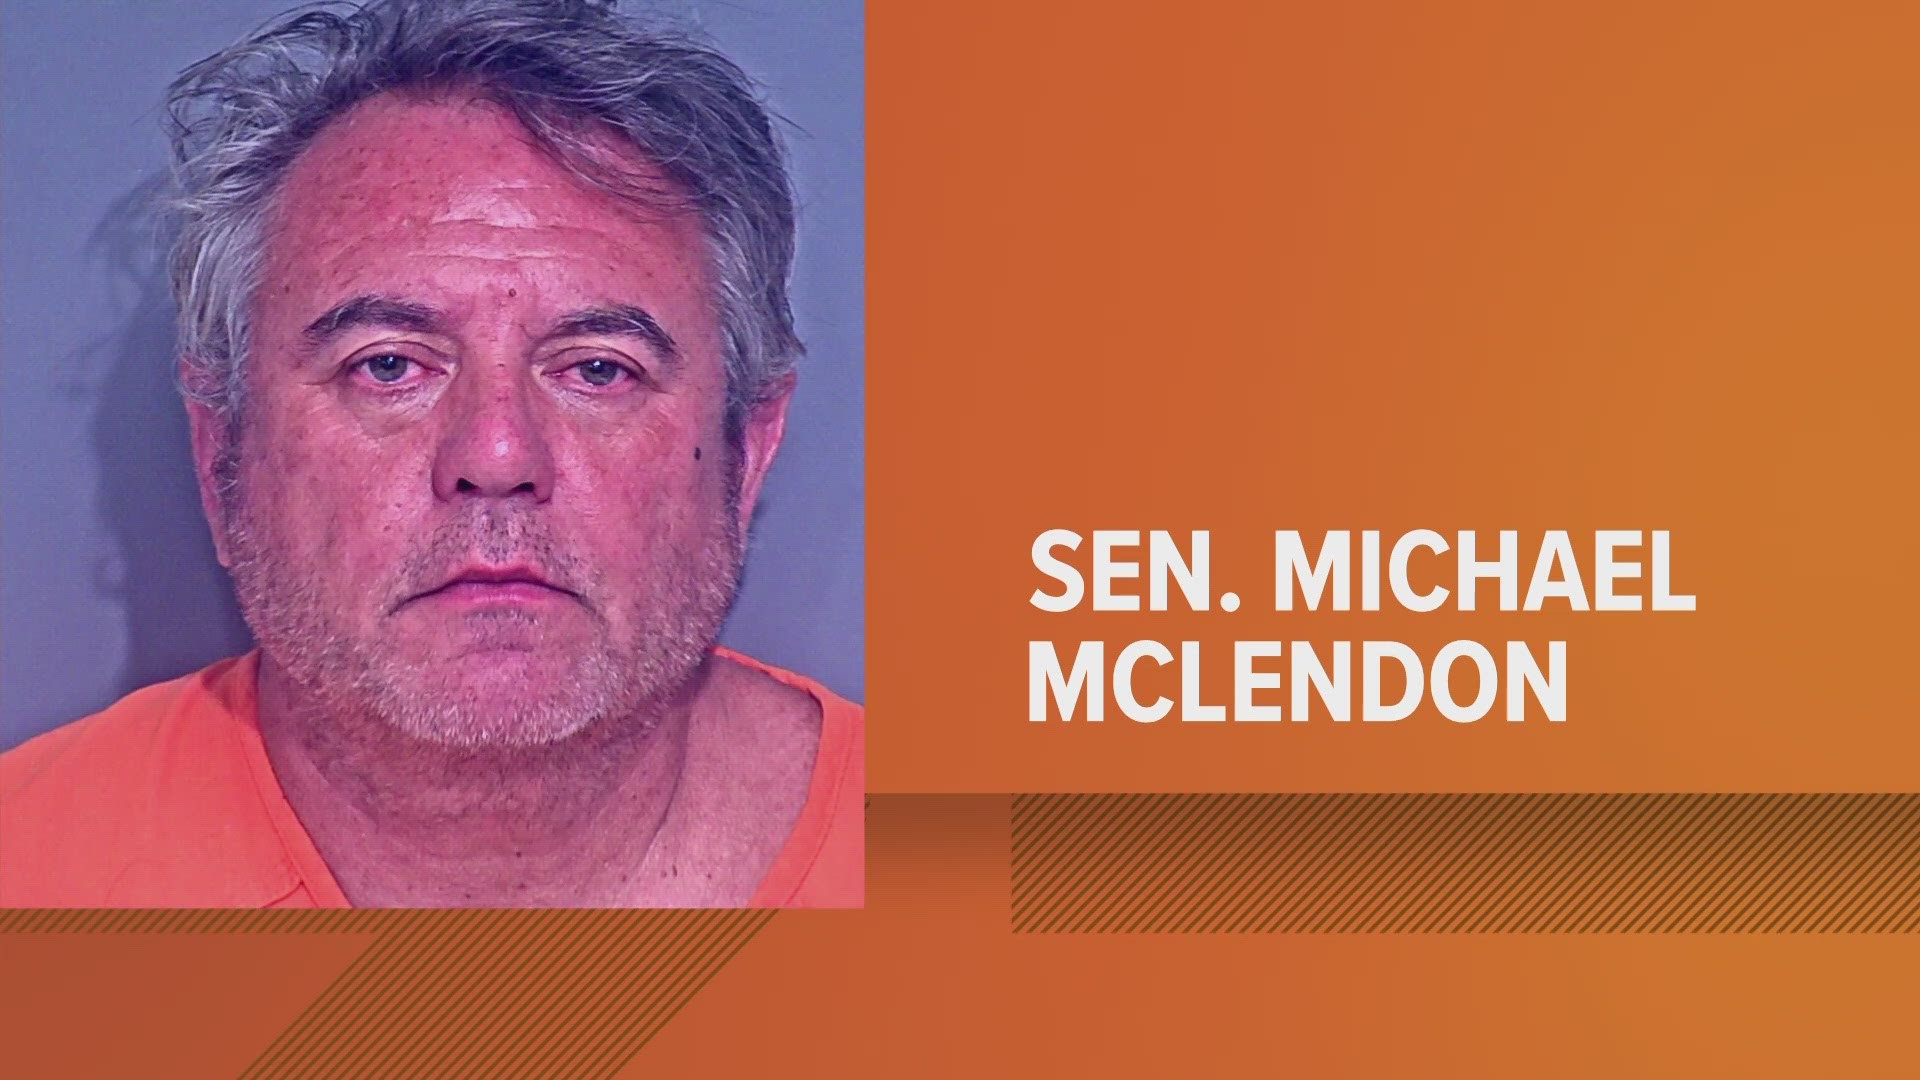 Michael McLendon was released after posting $2,500 bond.